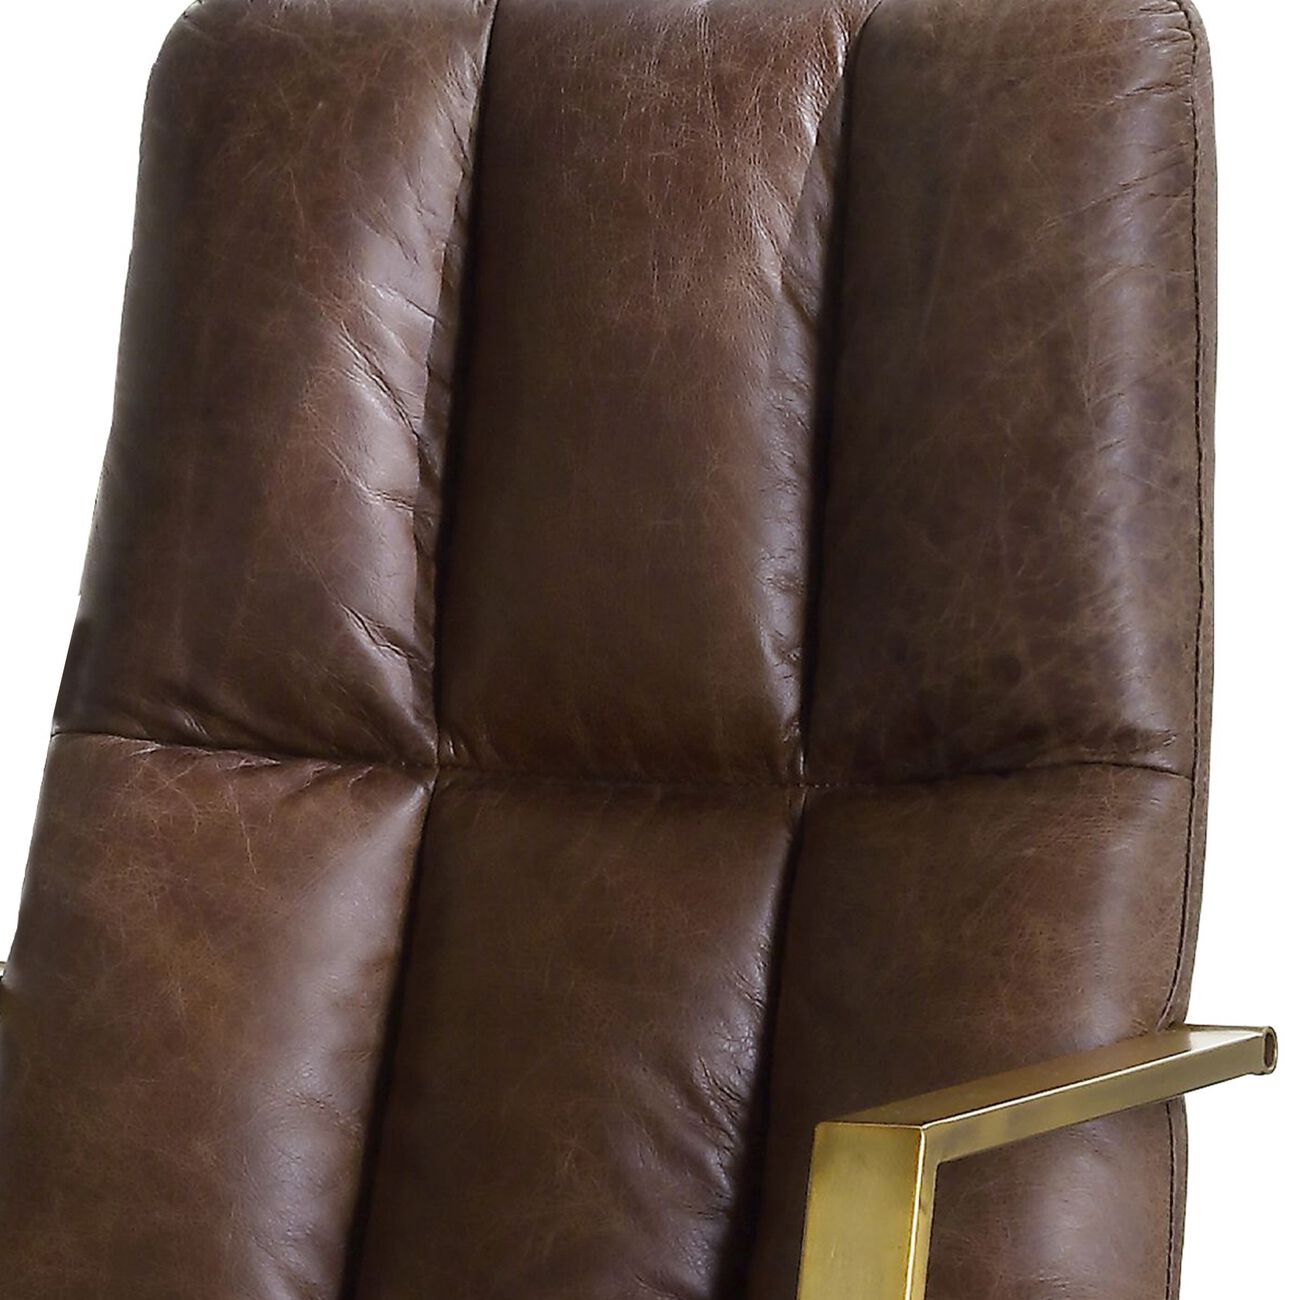 Tufted Leatherette Office Chair with Adjustable Height, Brown and Gold